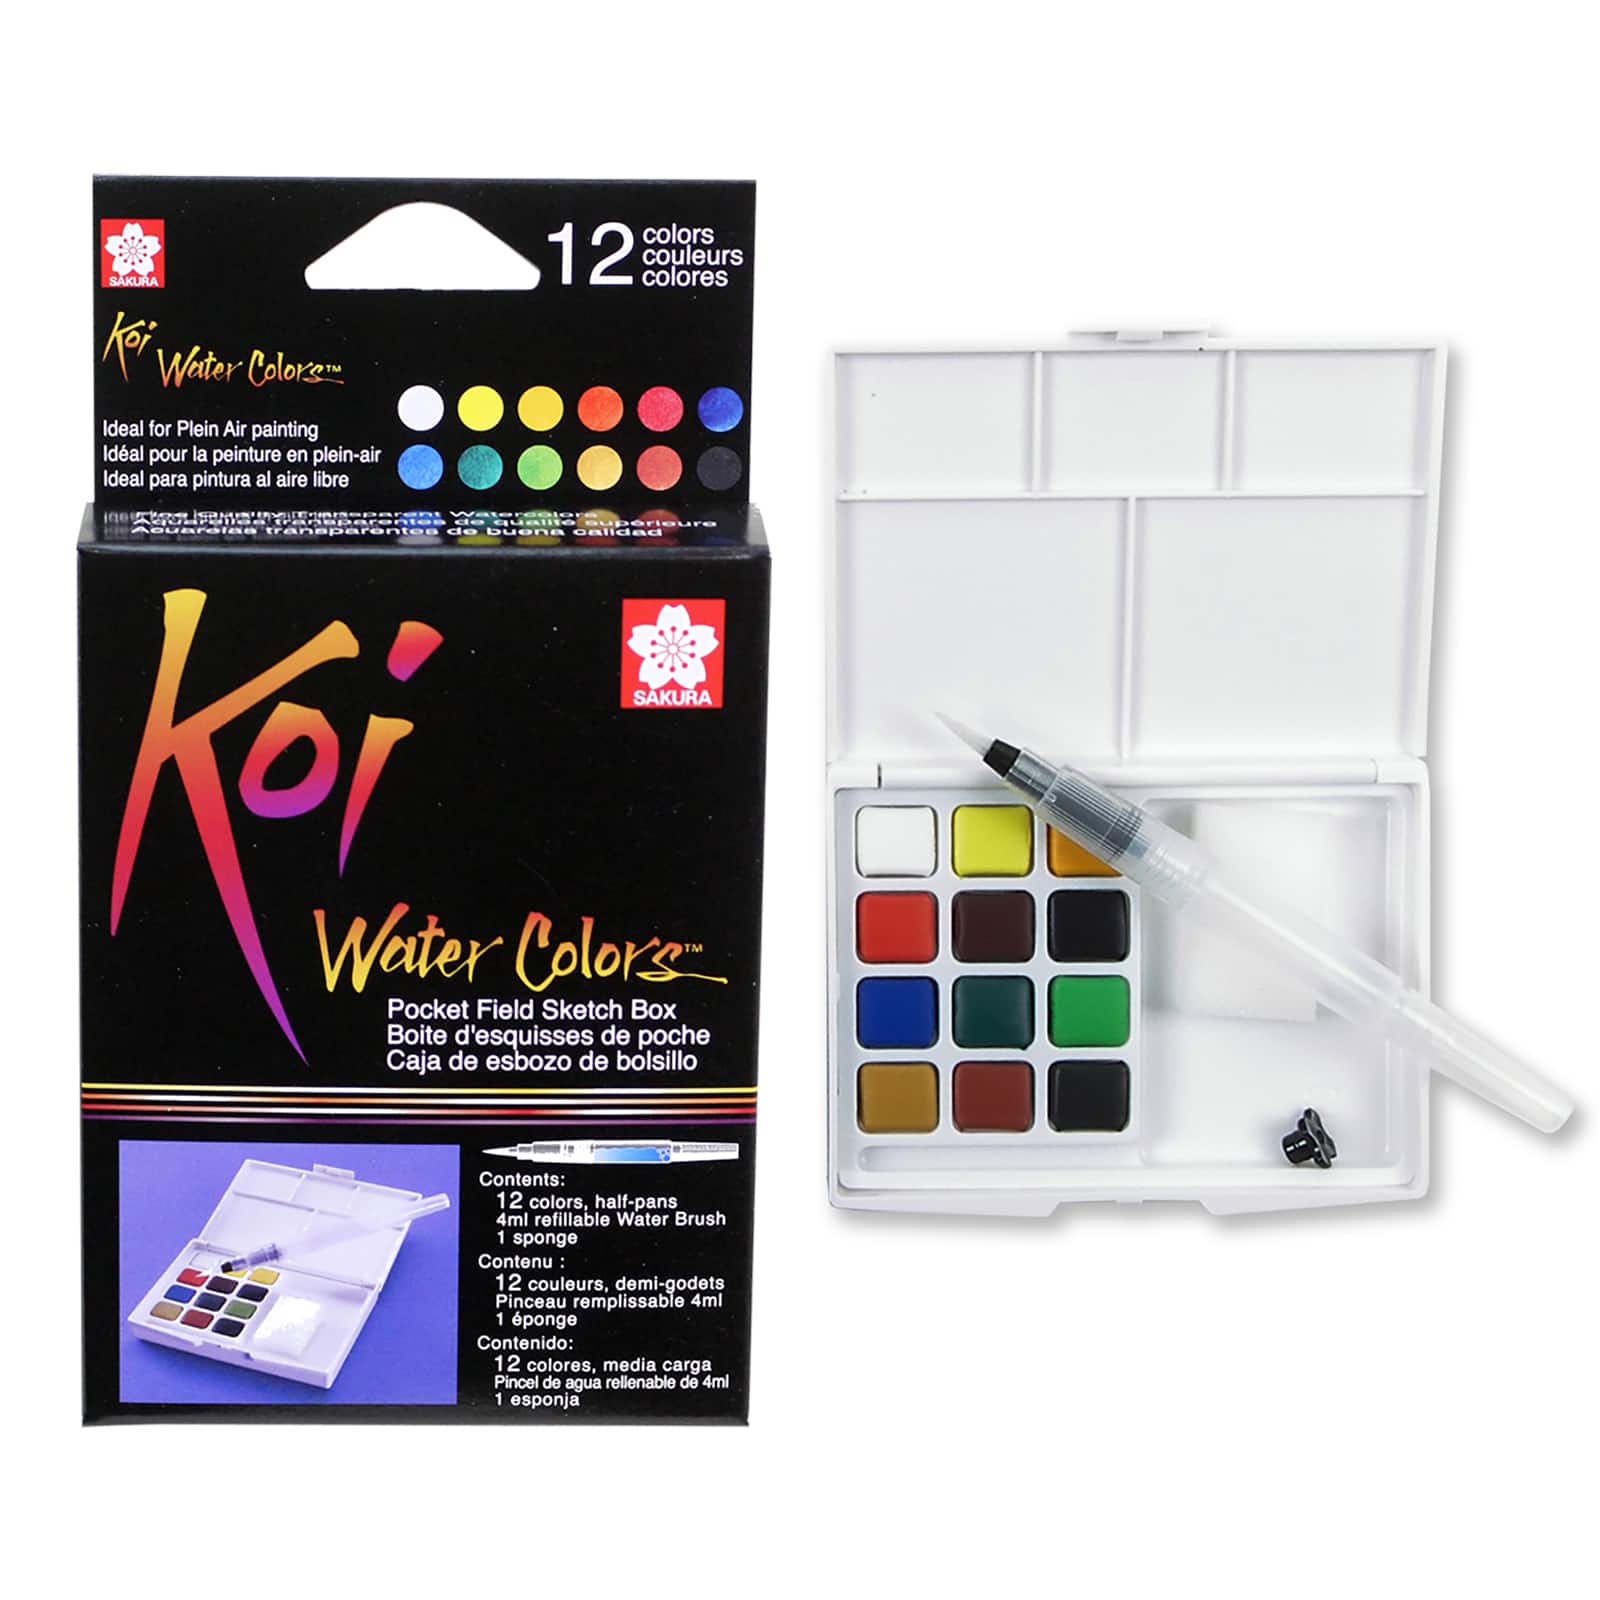 16 Color Watercolor Paint Strips - 12 Pieces - Educational And Learning  Activities For Kids